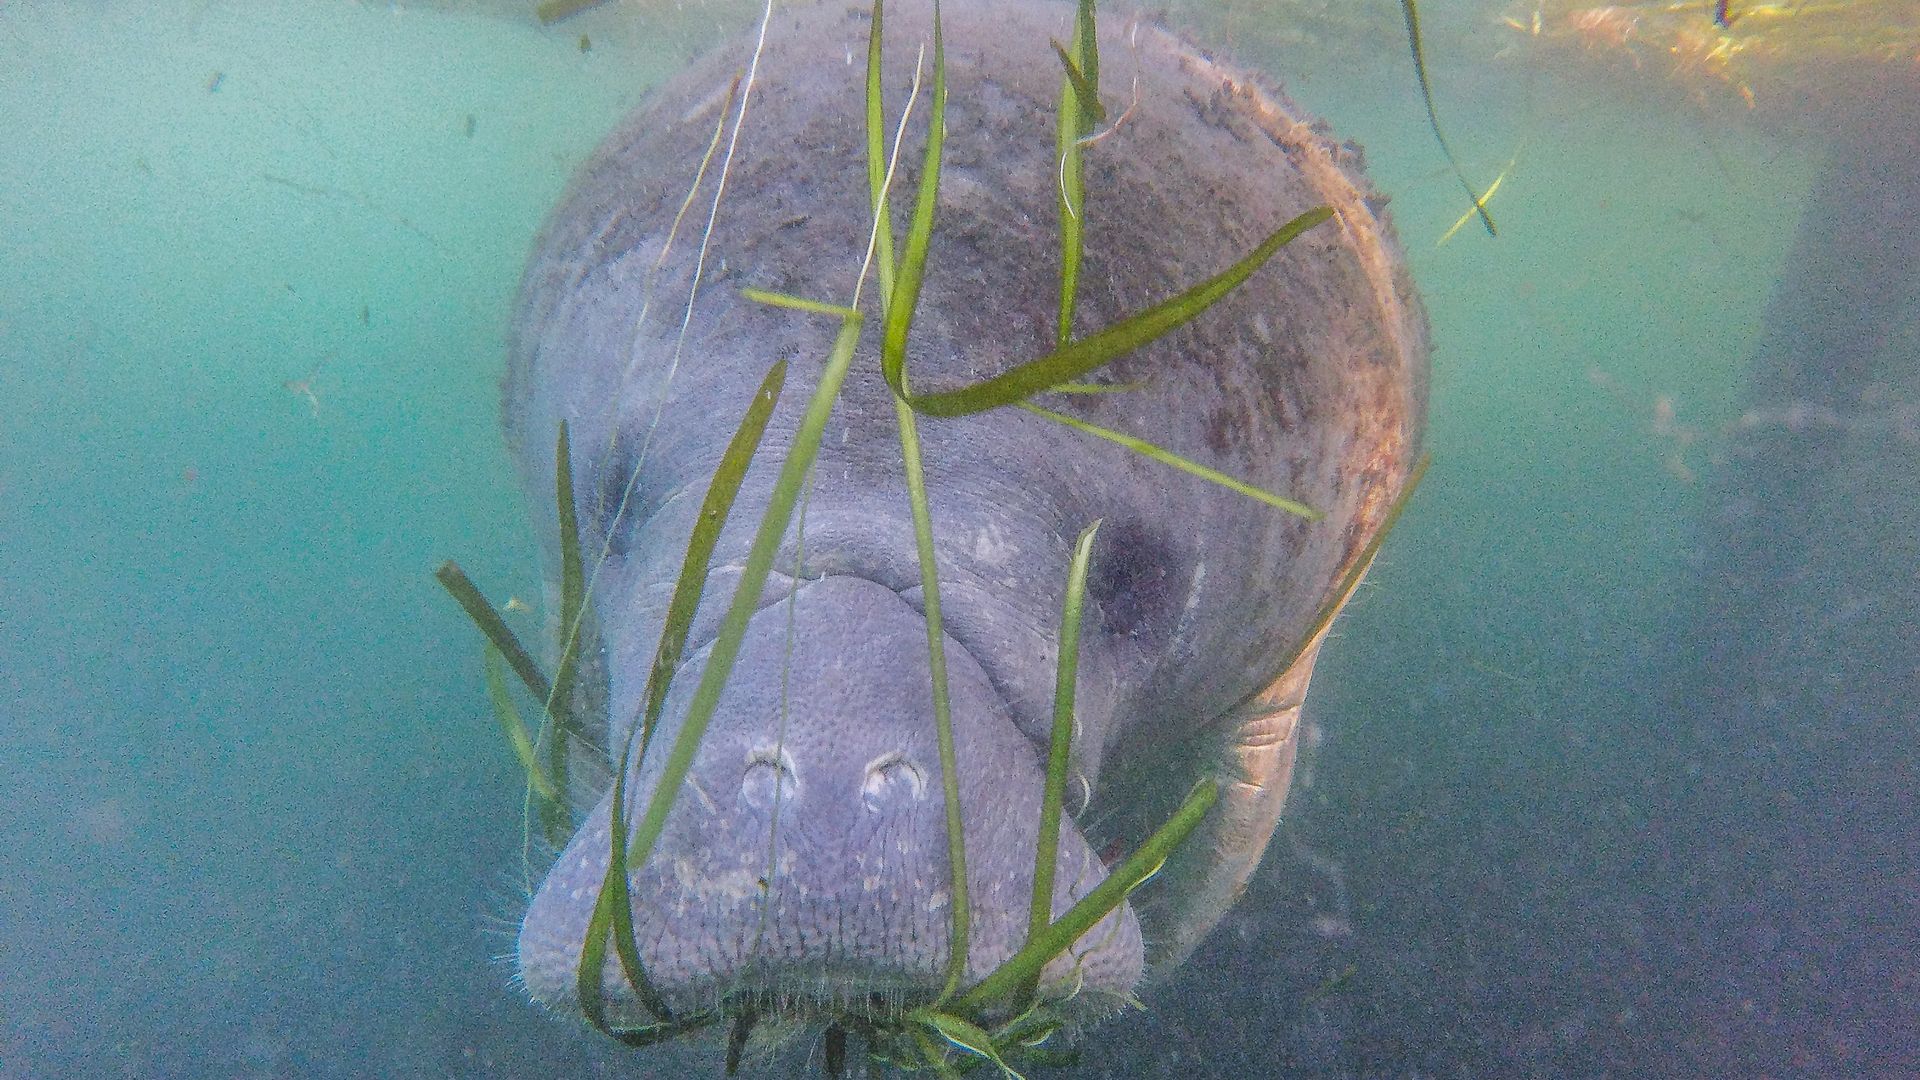 A manatee swims beside a tour boat in the Crystal River Preserve State Park